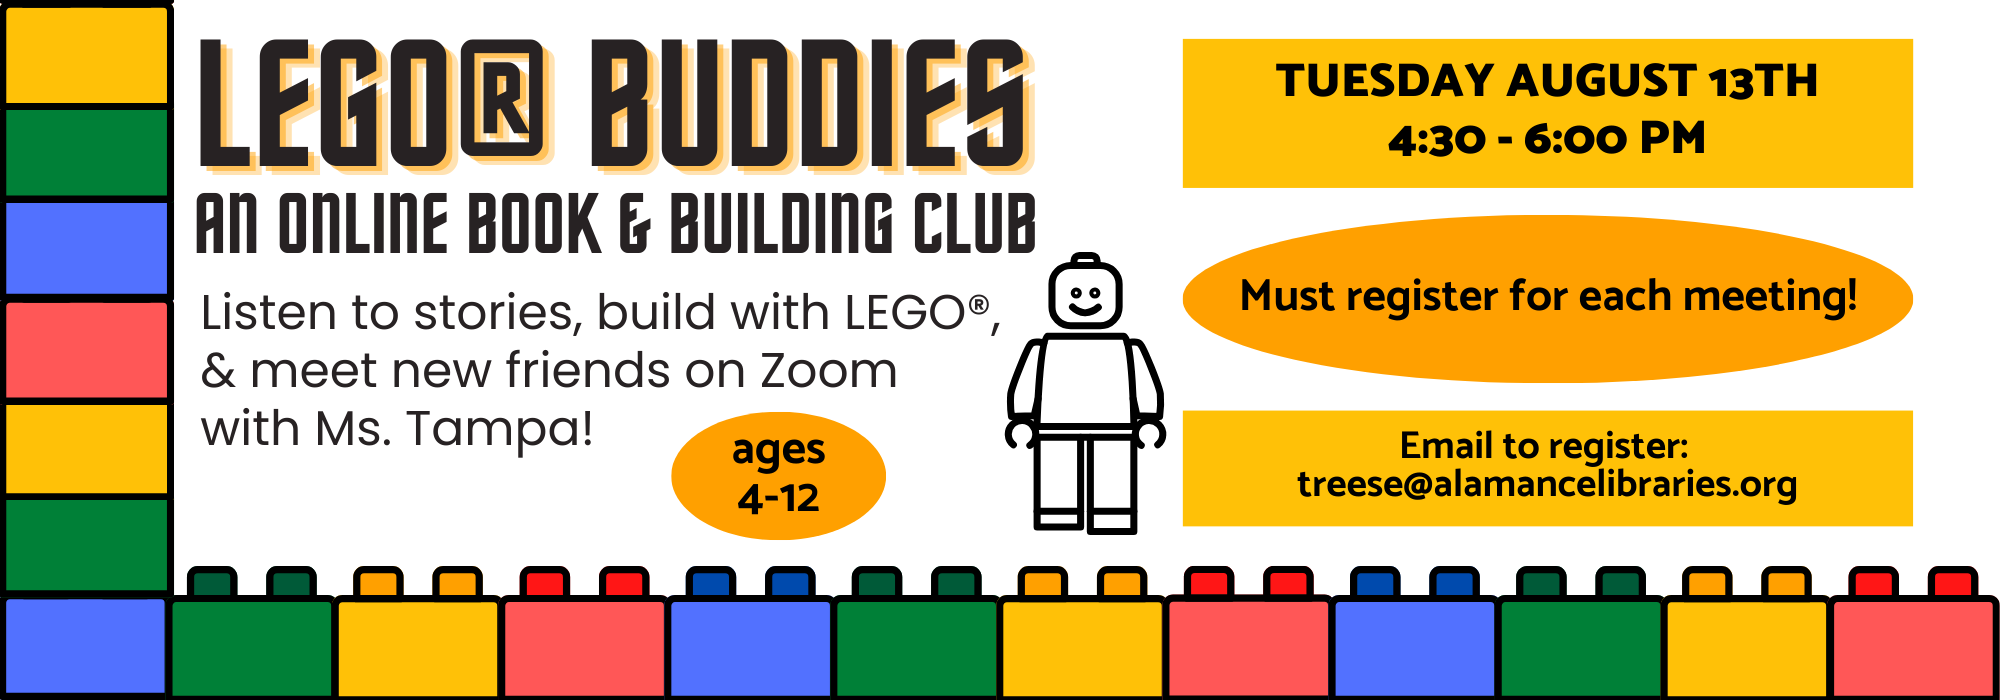 8.13 at 430 pm - LEGO Buddies on Zoom with Ms. Tampa from Mebane